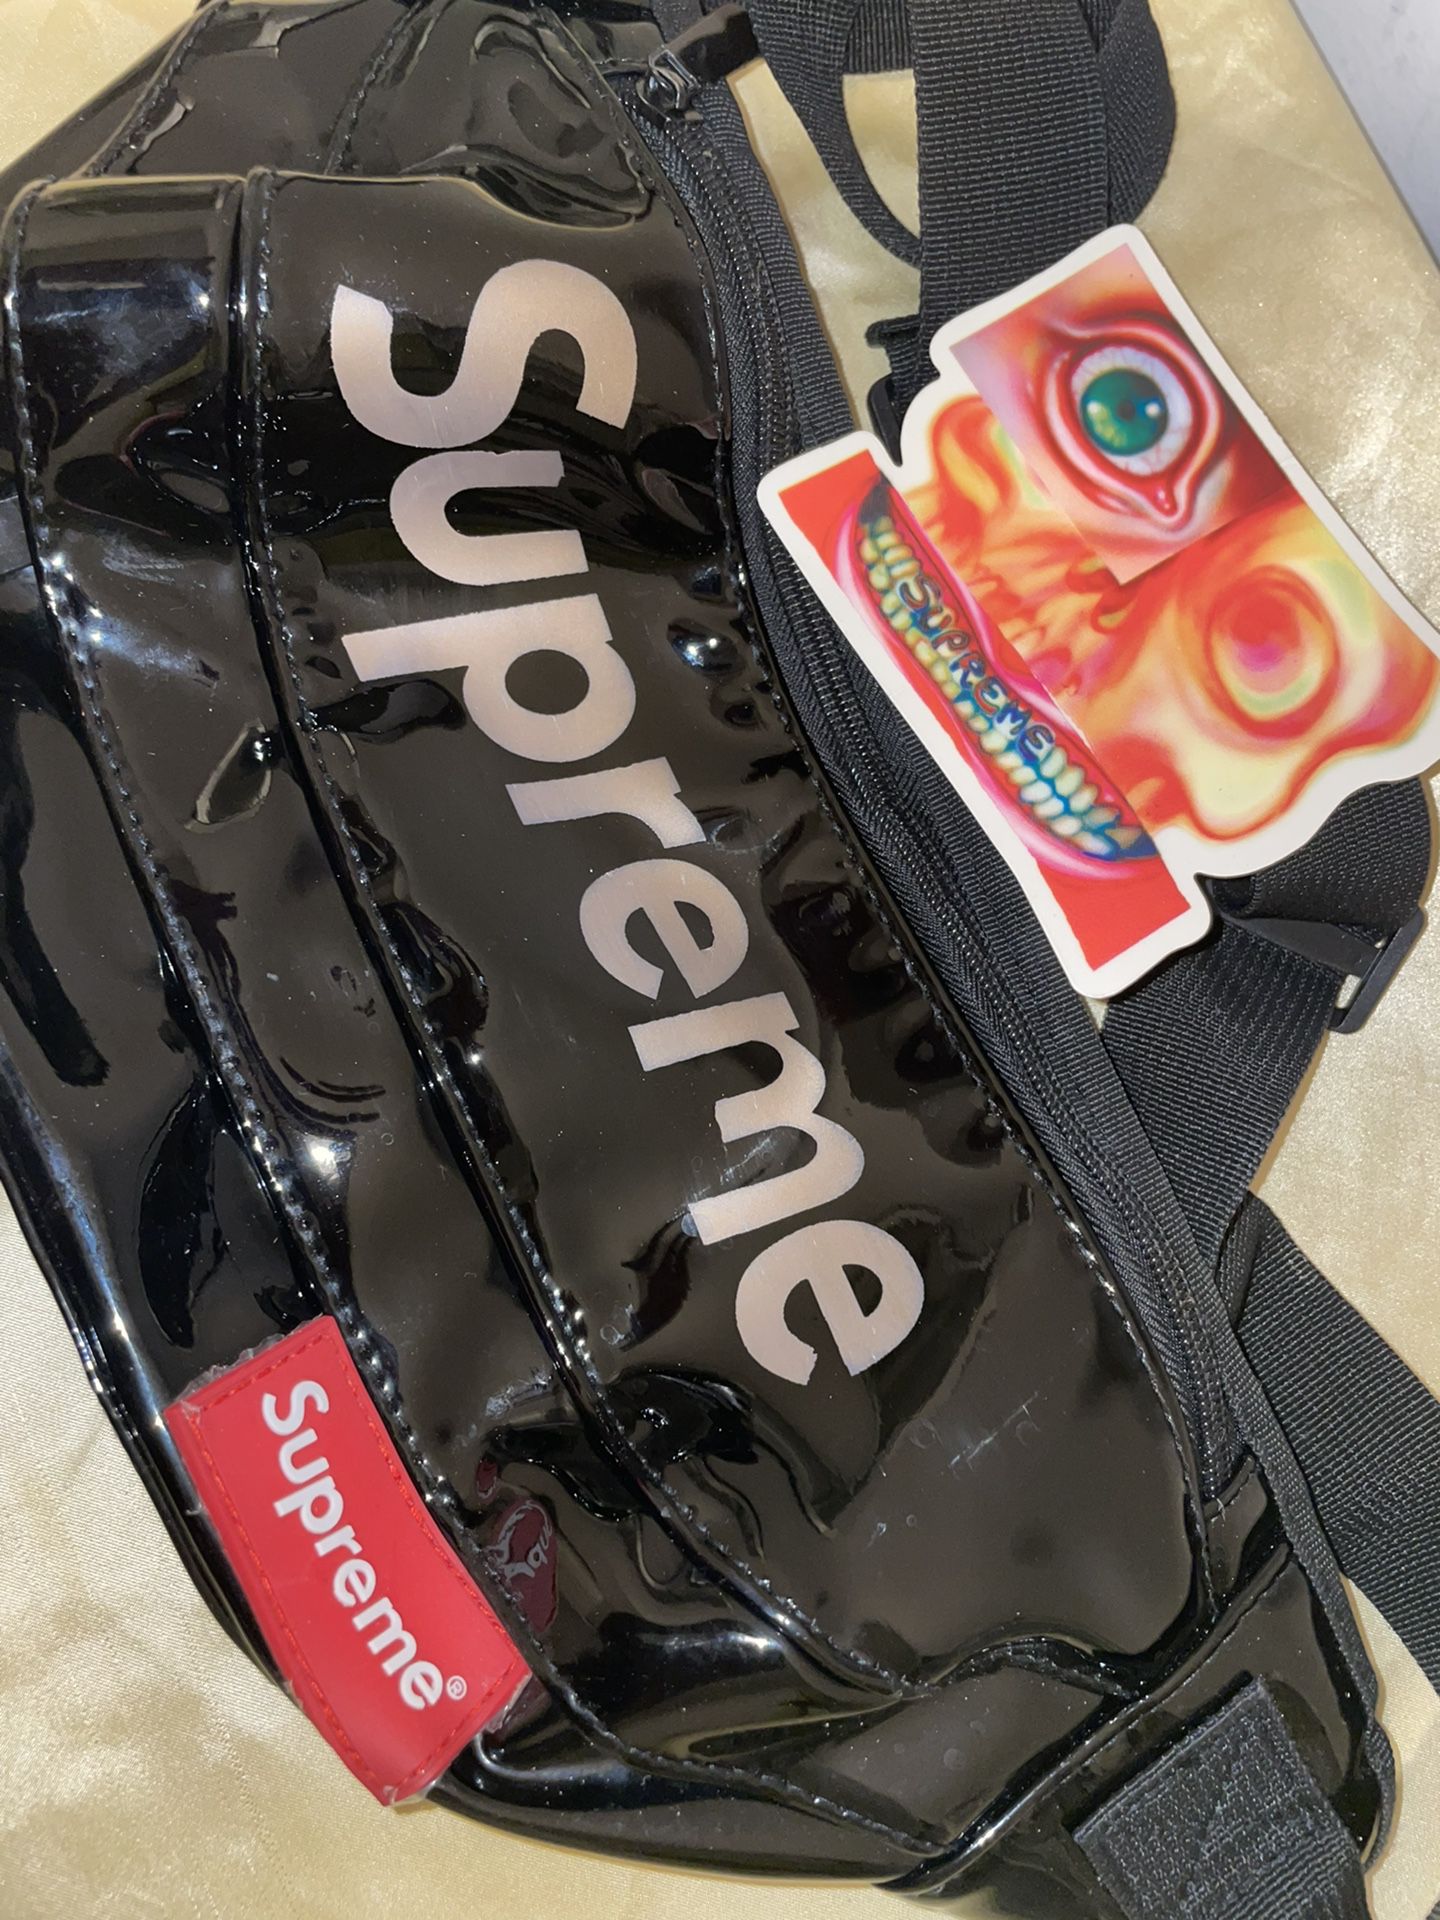 Supreme X Louis Vuitton Sling Bag for Sale in New York, NY - OfferUp